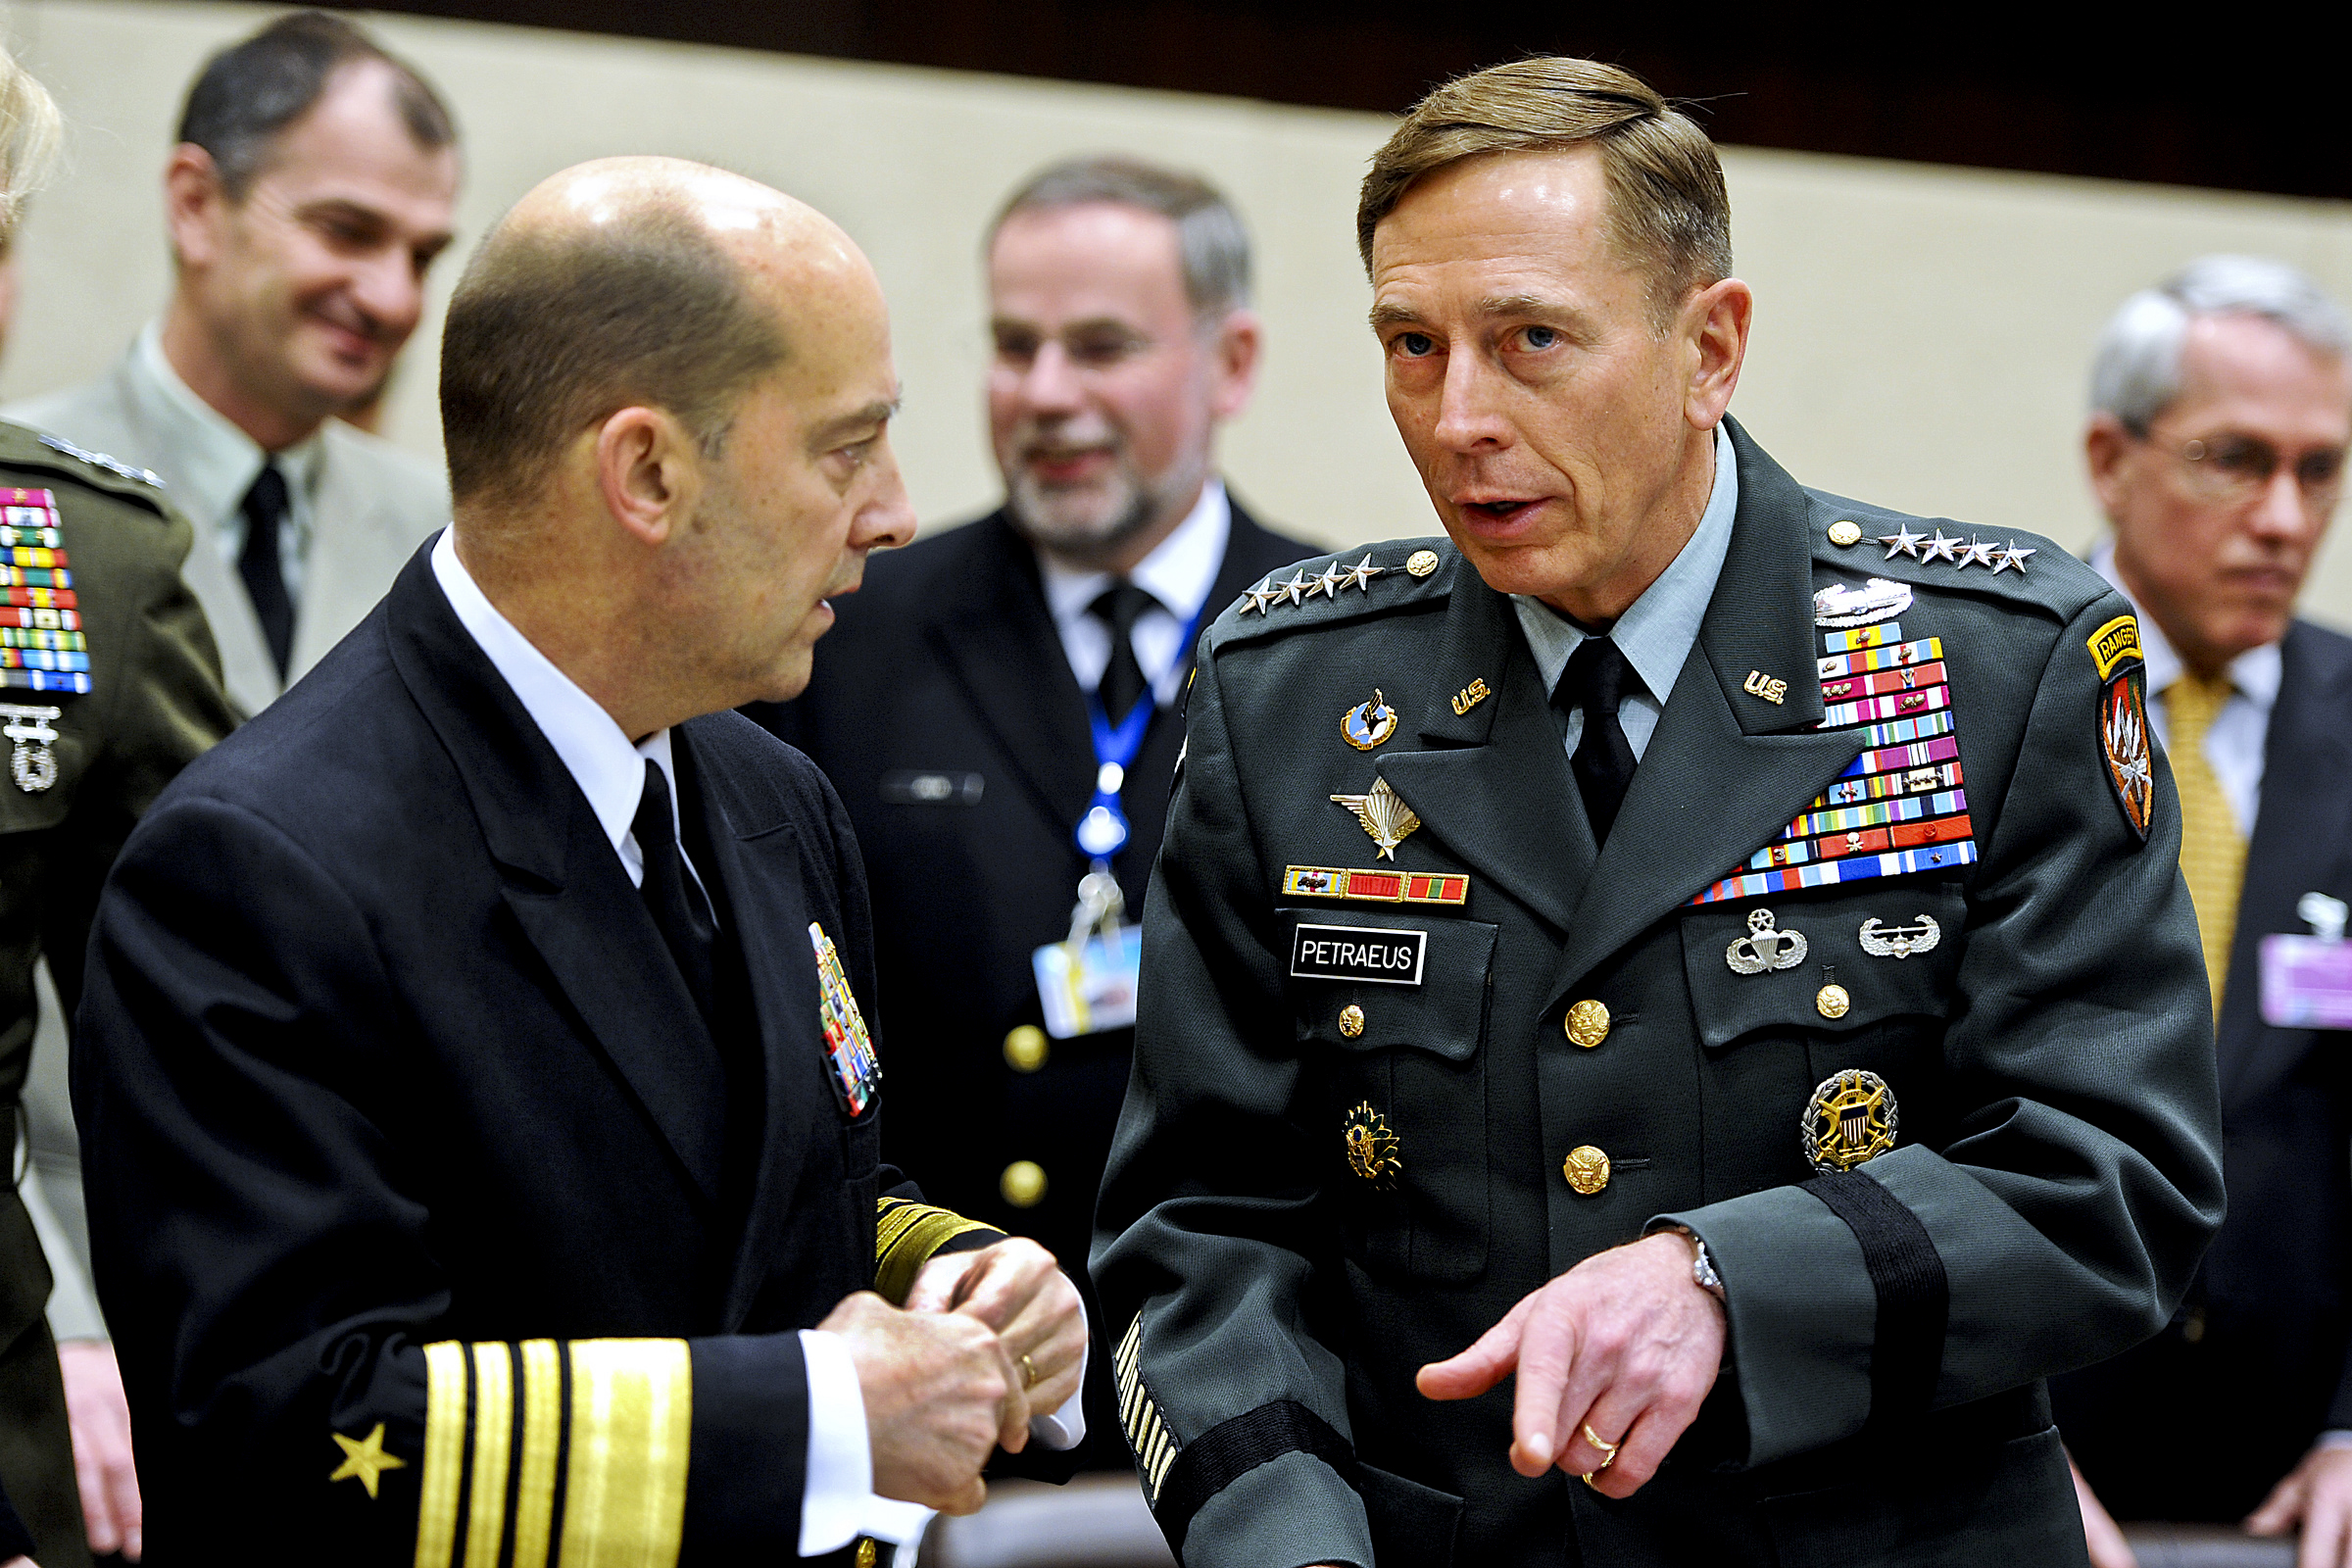 U.S. Army Gen. David H. Petraeus, right, Commander NATO International Security Assistance Force (ISAF) and U.S. Forces Afghanistan, speaks with Admiral James G. Stavridis, commander of European Command and Supreme Allied Commander, Europe, at the NATO headquarters in Brussels, Belgium March 11, 2011. Defense Department photo by Cherie Cullen (released)